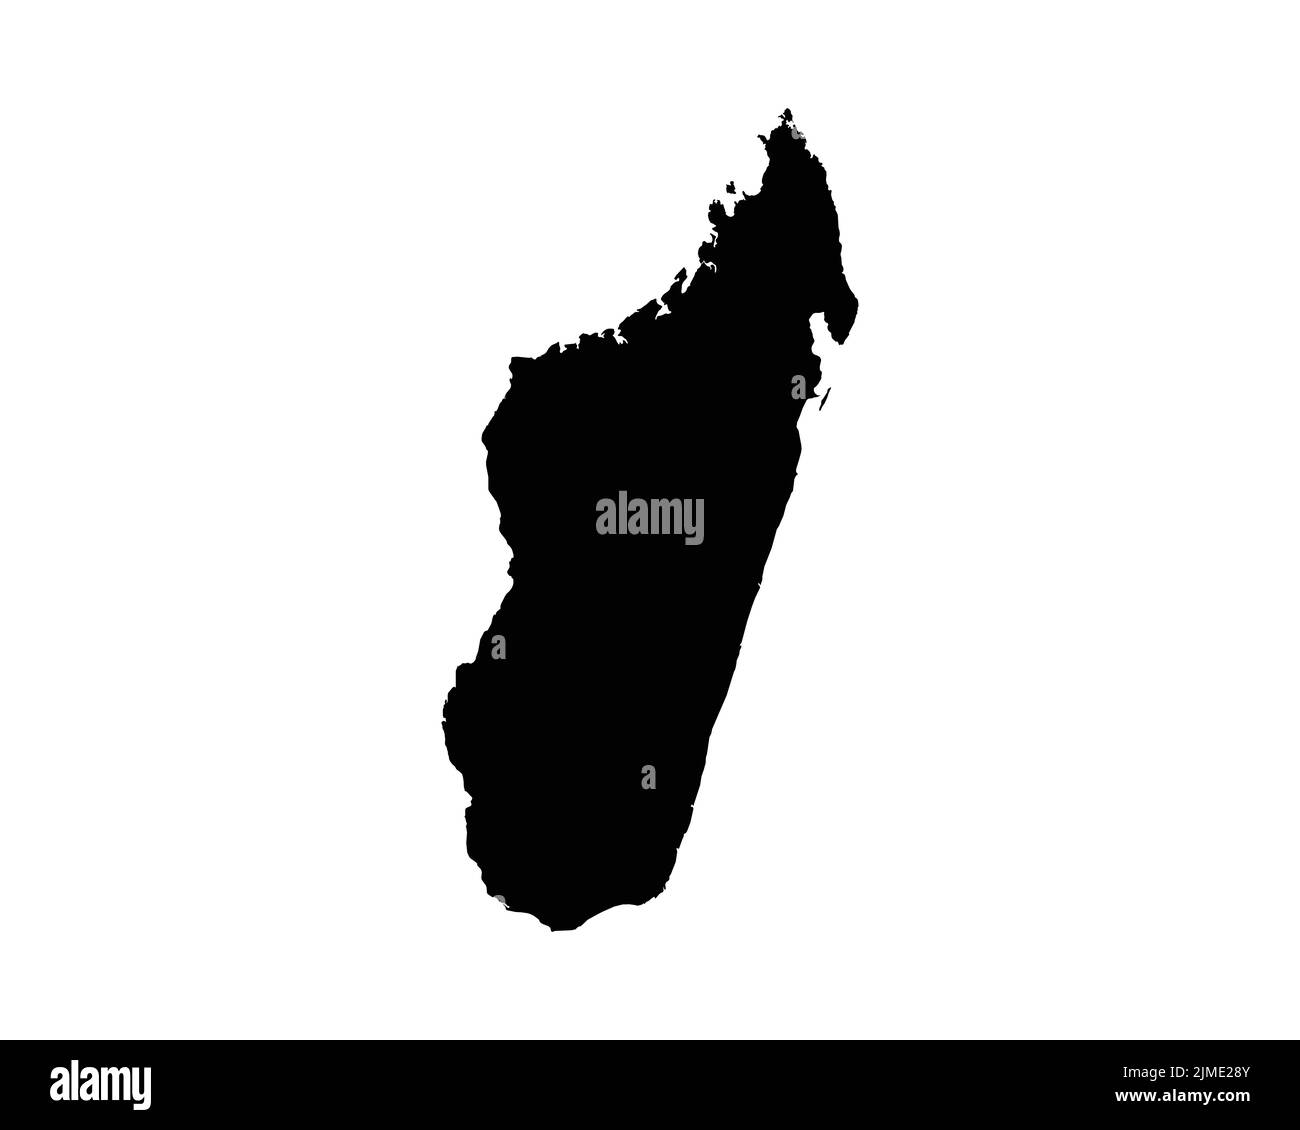 Madagascar Map. Malagasy Country Map. Black and White National Nation Outline Geography Border Boundary Shape Territory Vector Illustration EPS Clipar Stock Vector